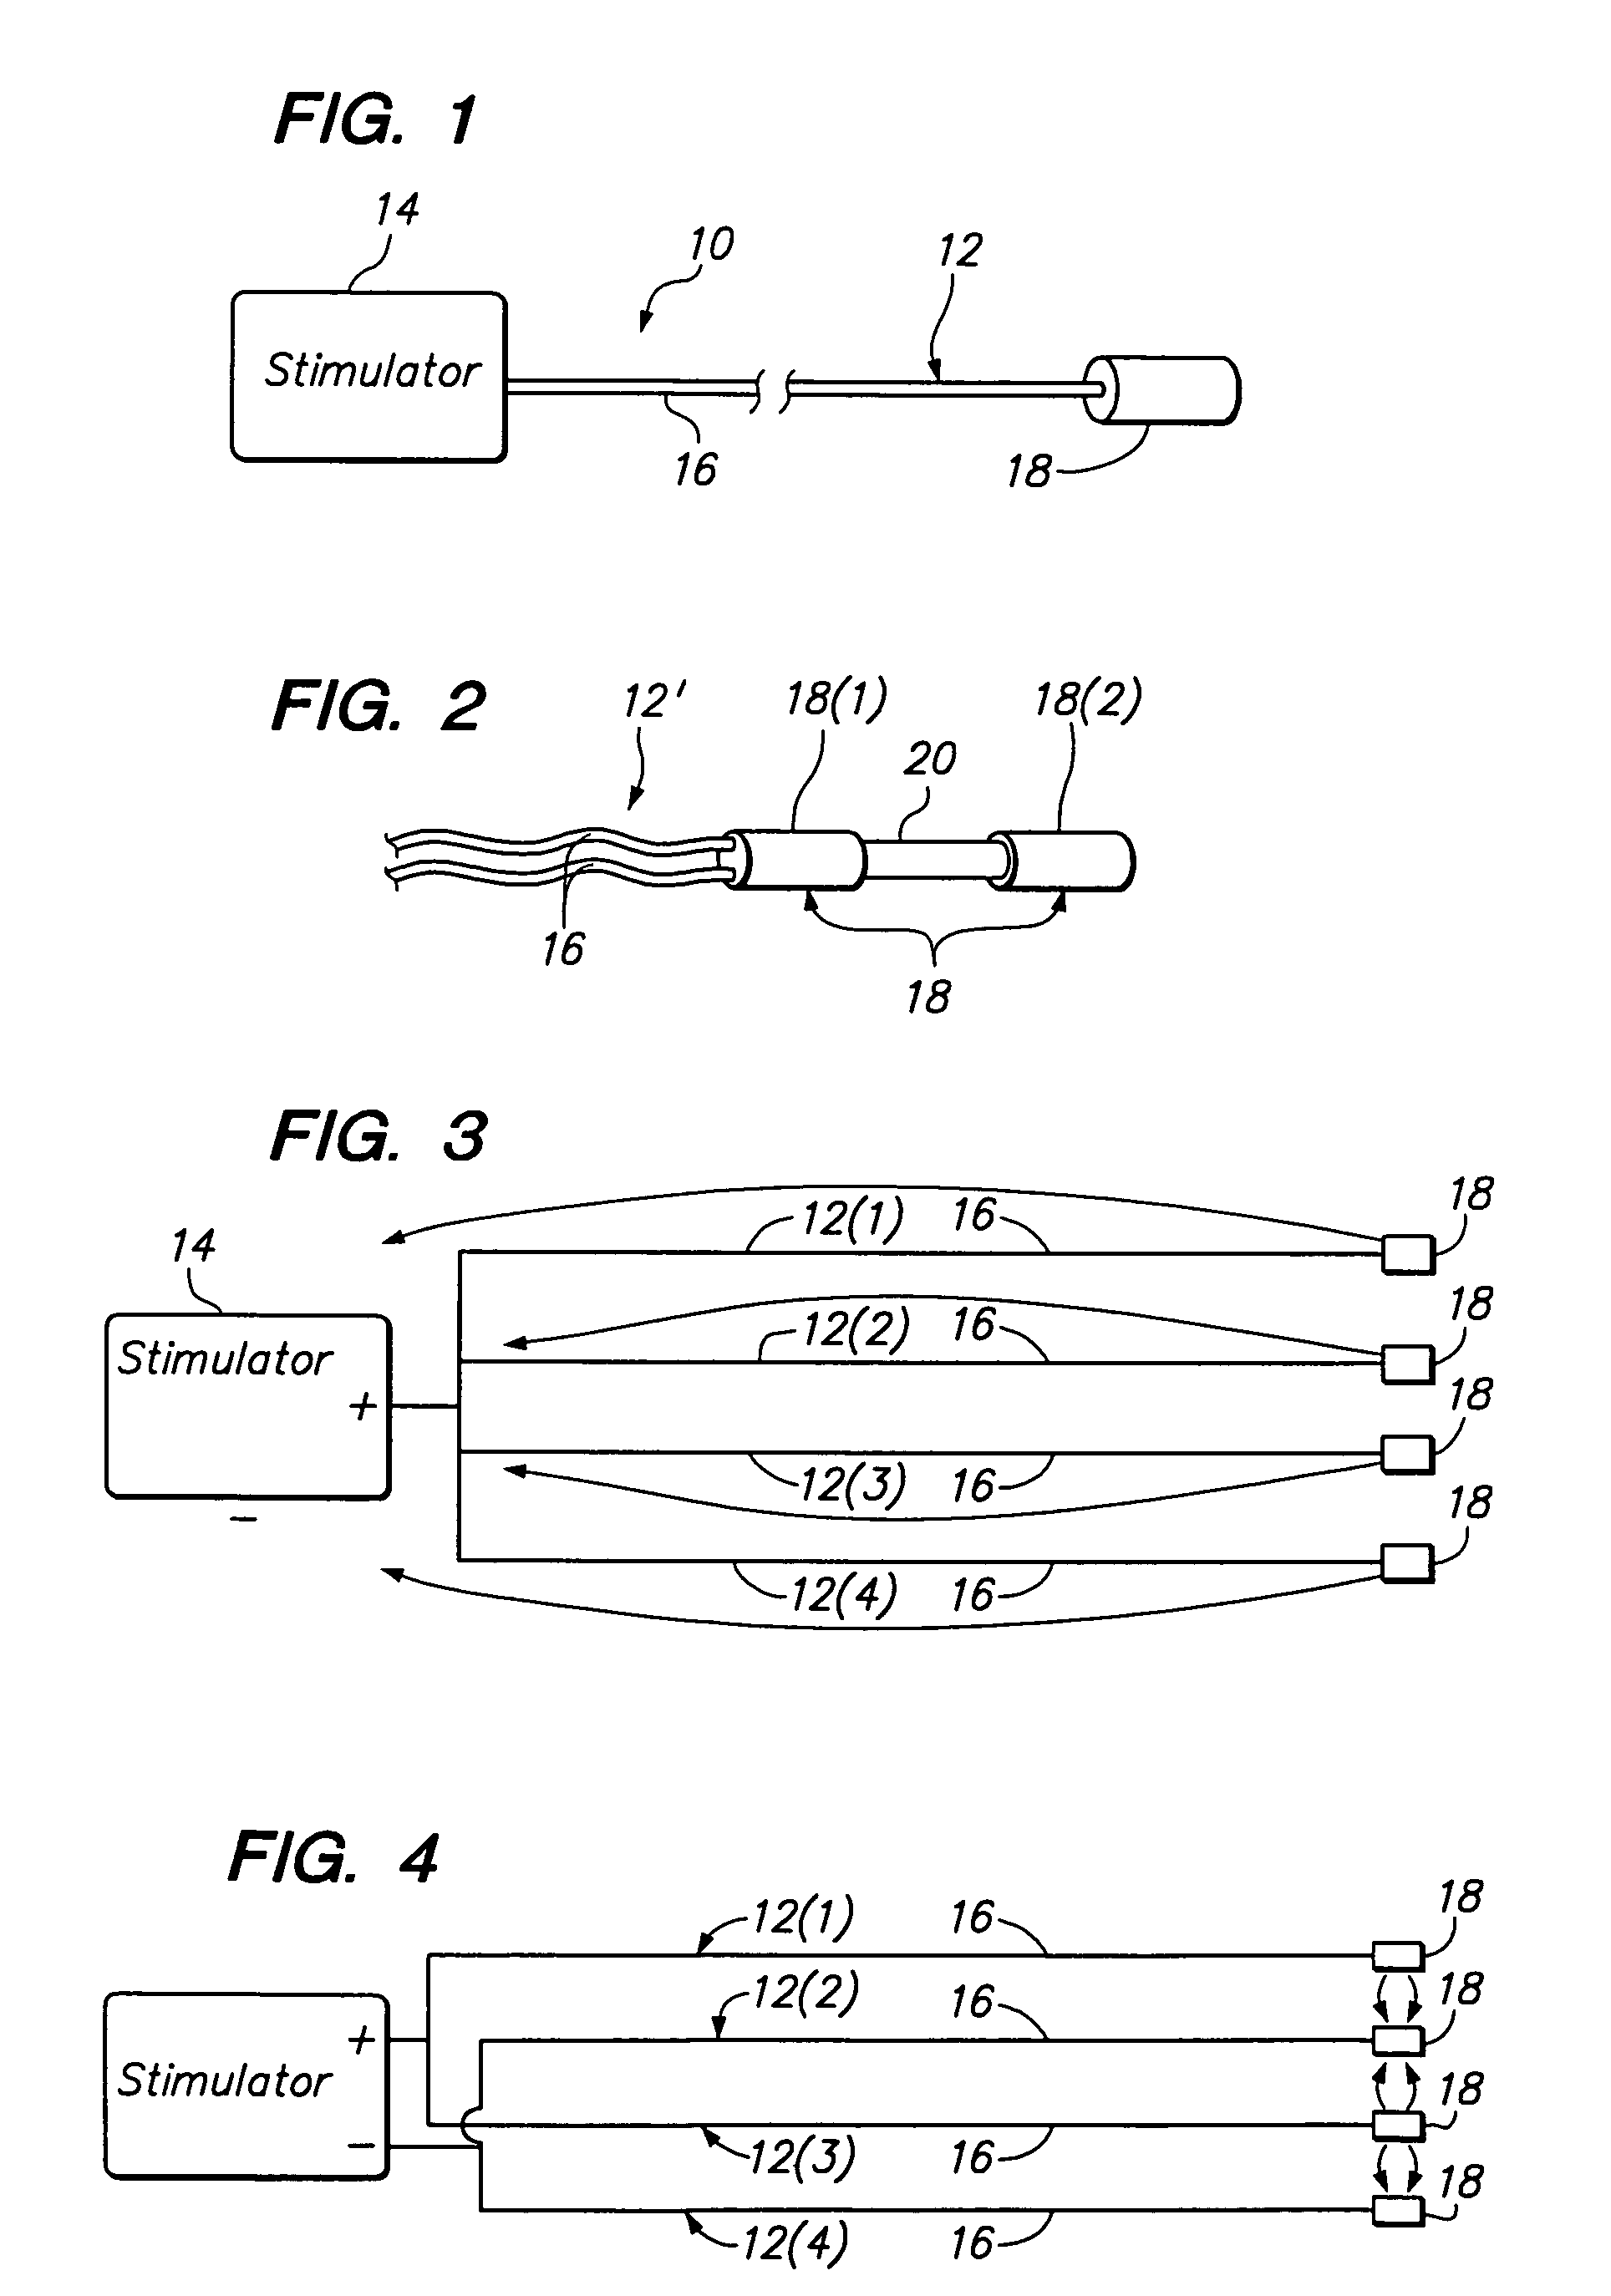 Method of intravascularly delivering stimulation leads into direct contact with tissue